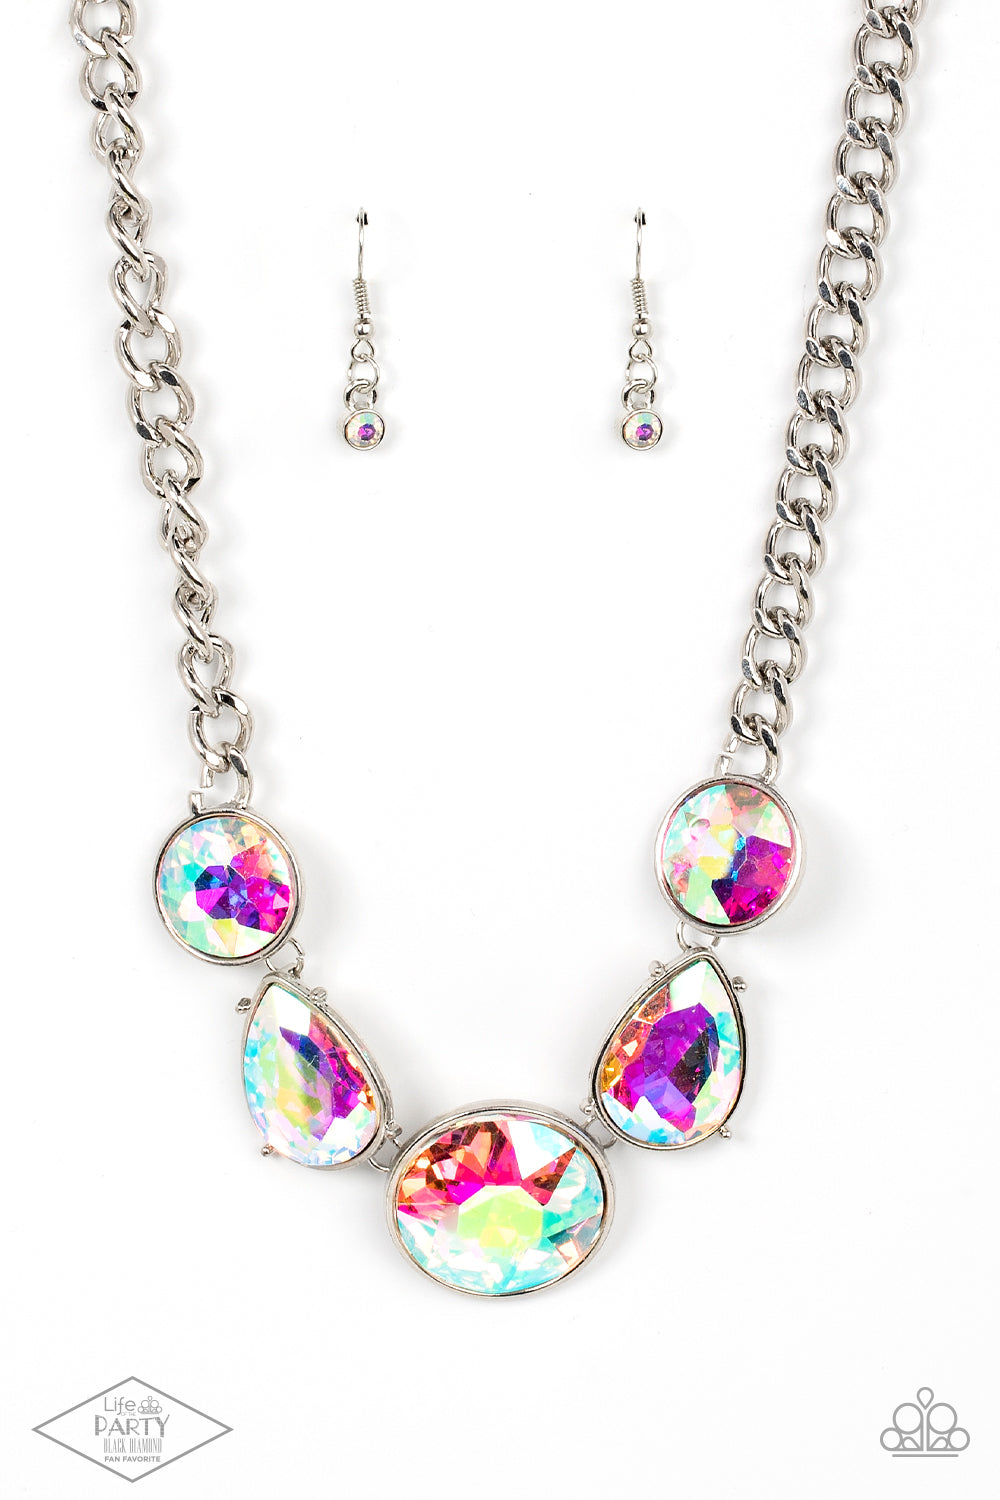 All The Worlds My Stage - Multi Iridescent Rhinestone Paparazzi Necklace & matching earrings